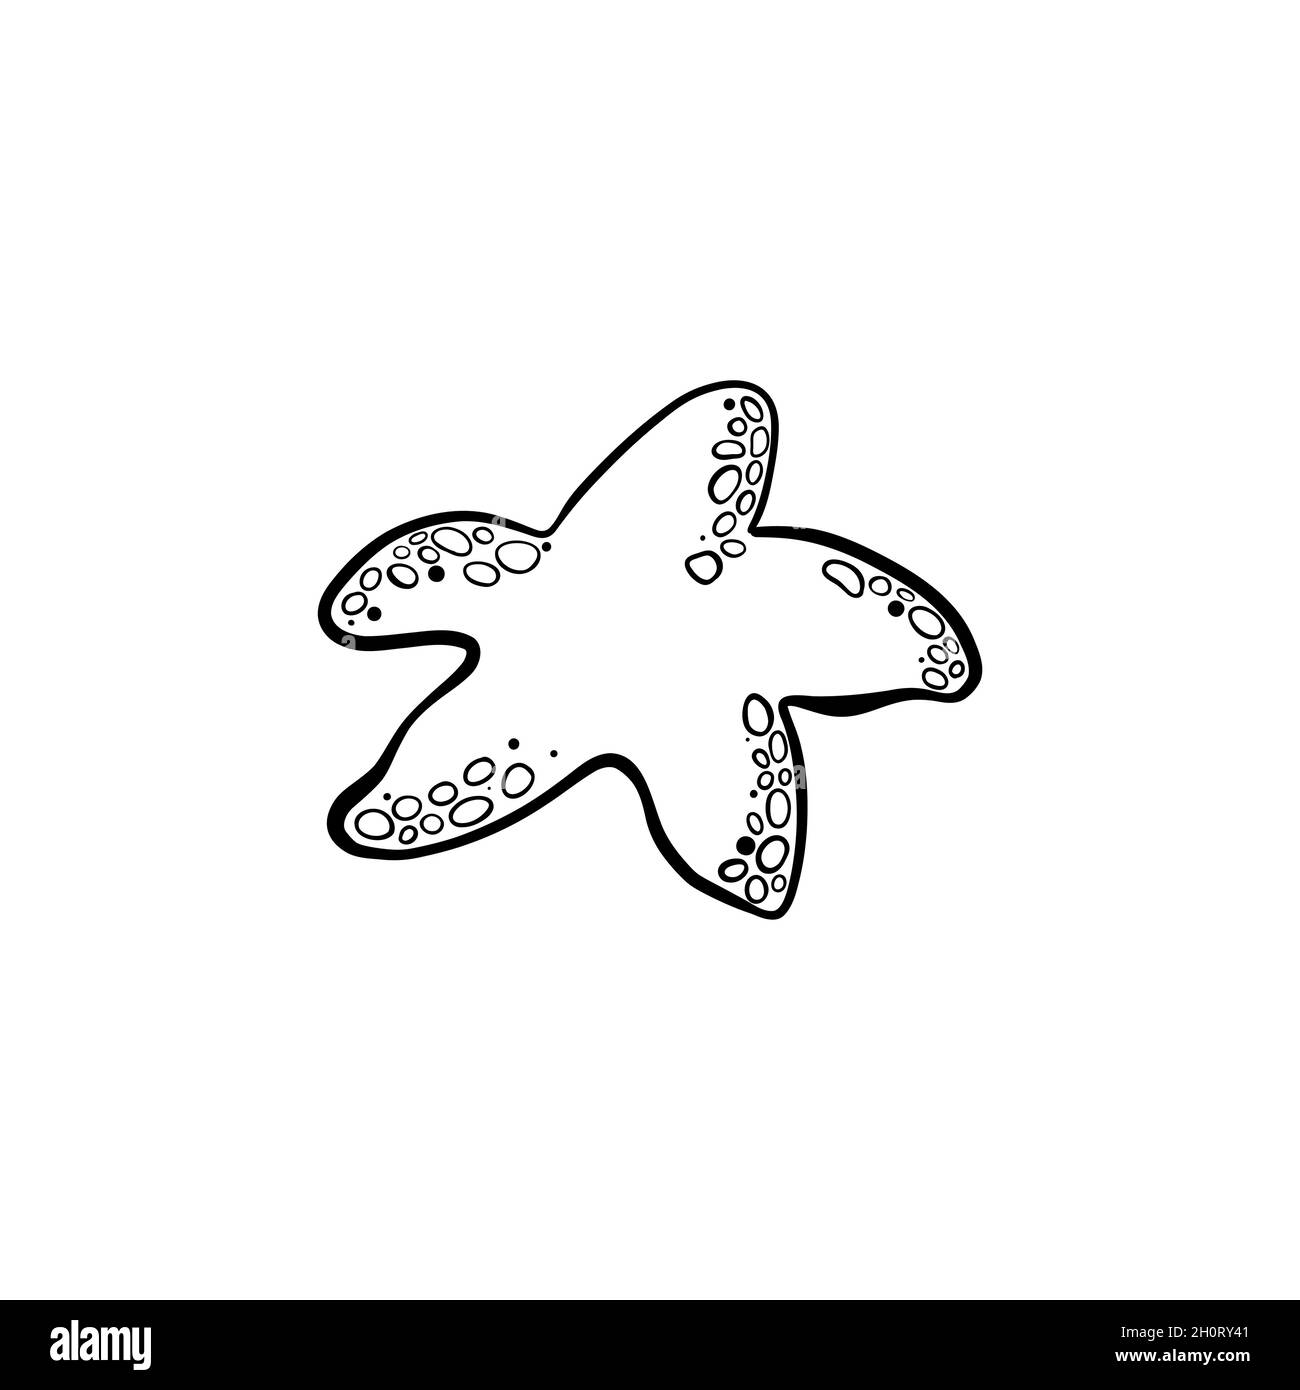 icon of starfish hand drawn illustration doodle Stock Vector